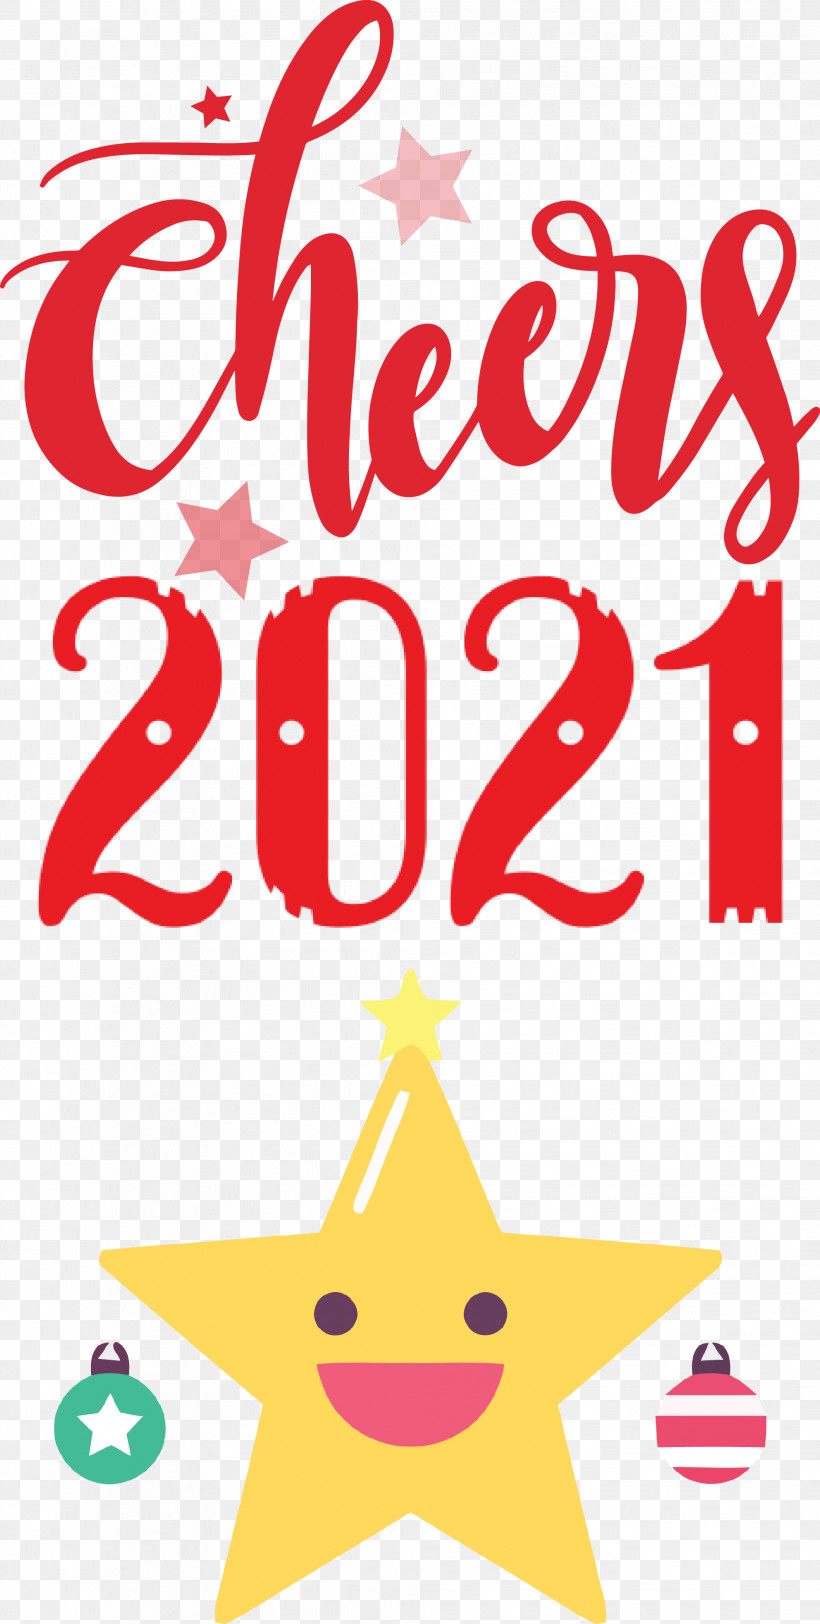 Cheers 2021 New Year Cheers.2021 New Year, PNG, 1983x3928px, Cheers 2021 New Year, Editing, Free, Svgedit, Text Download Free